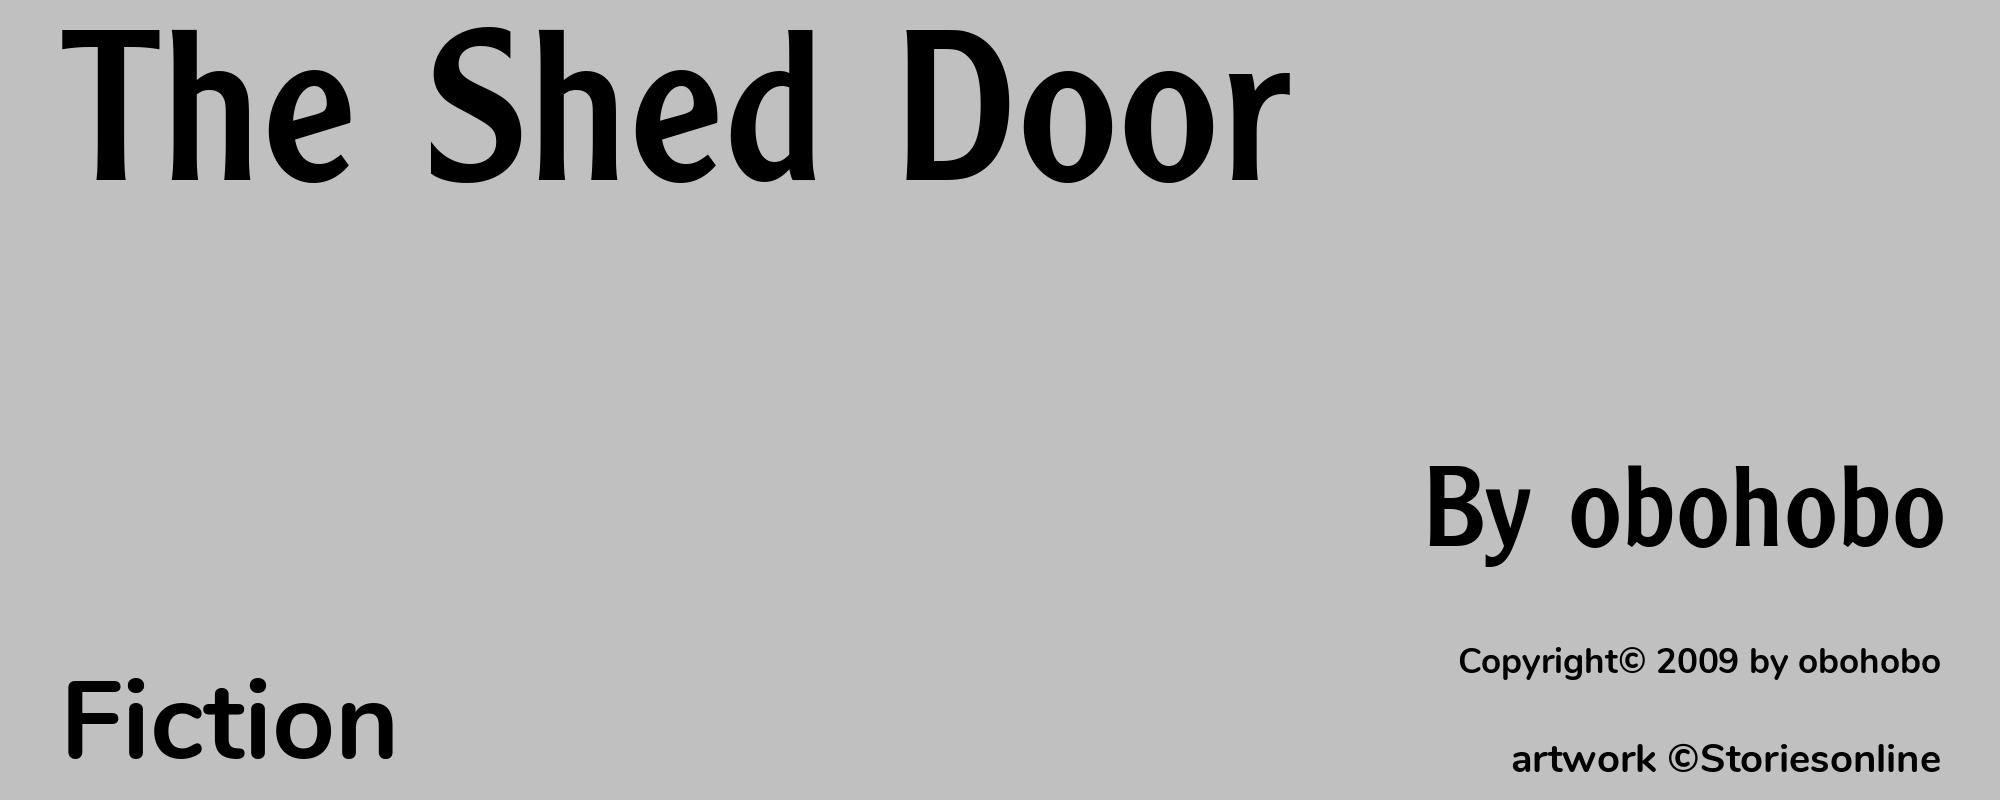 The Shed Door - Cover